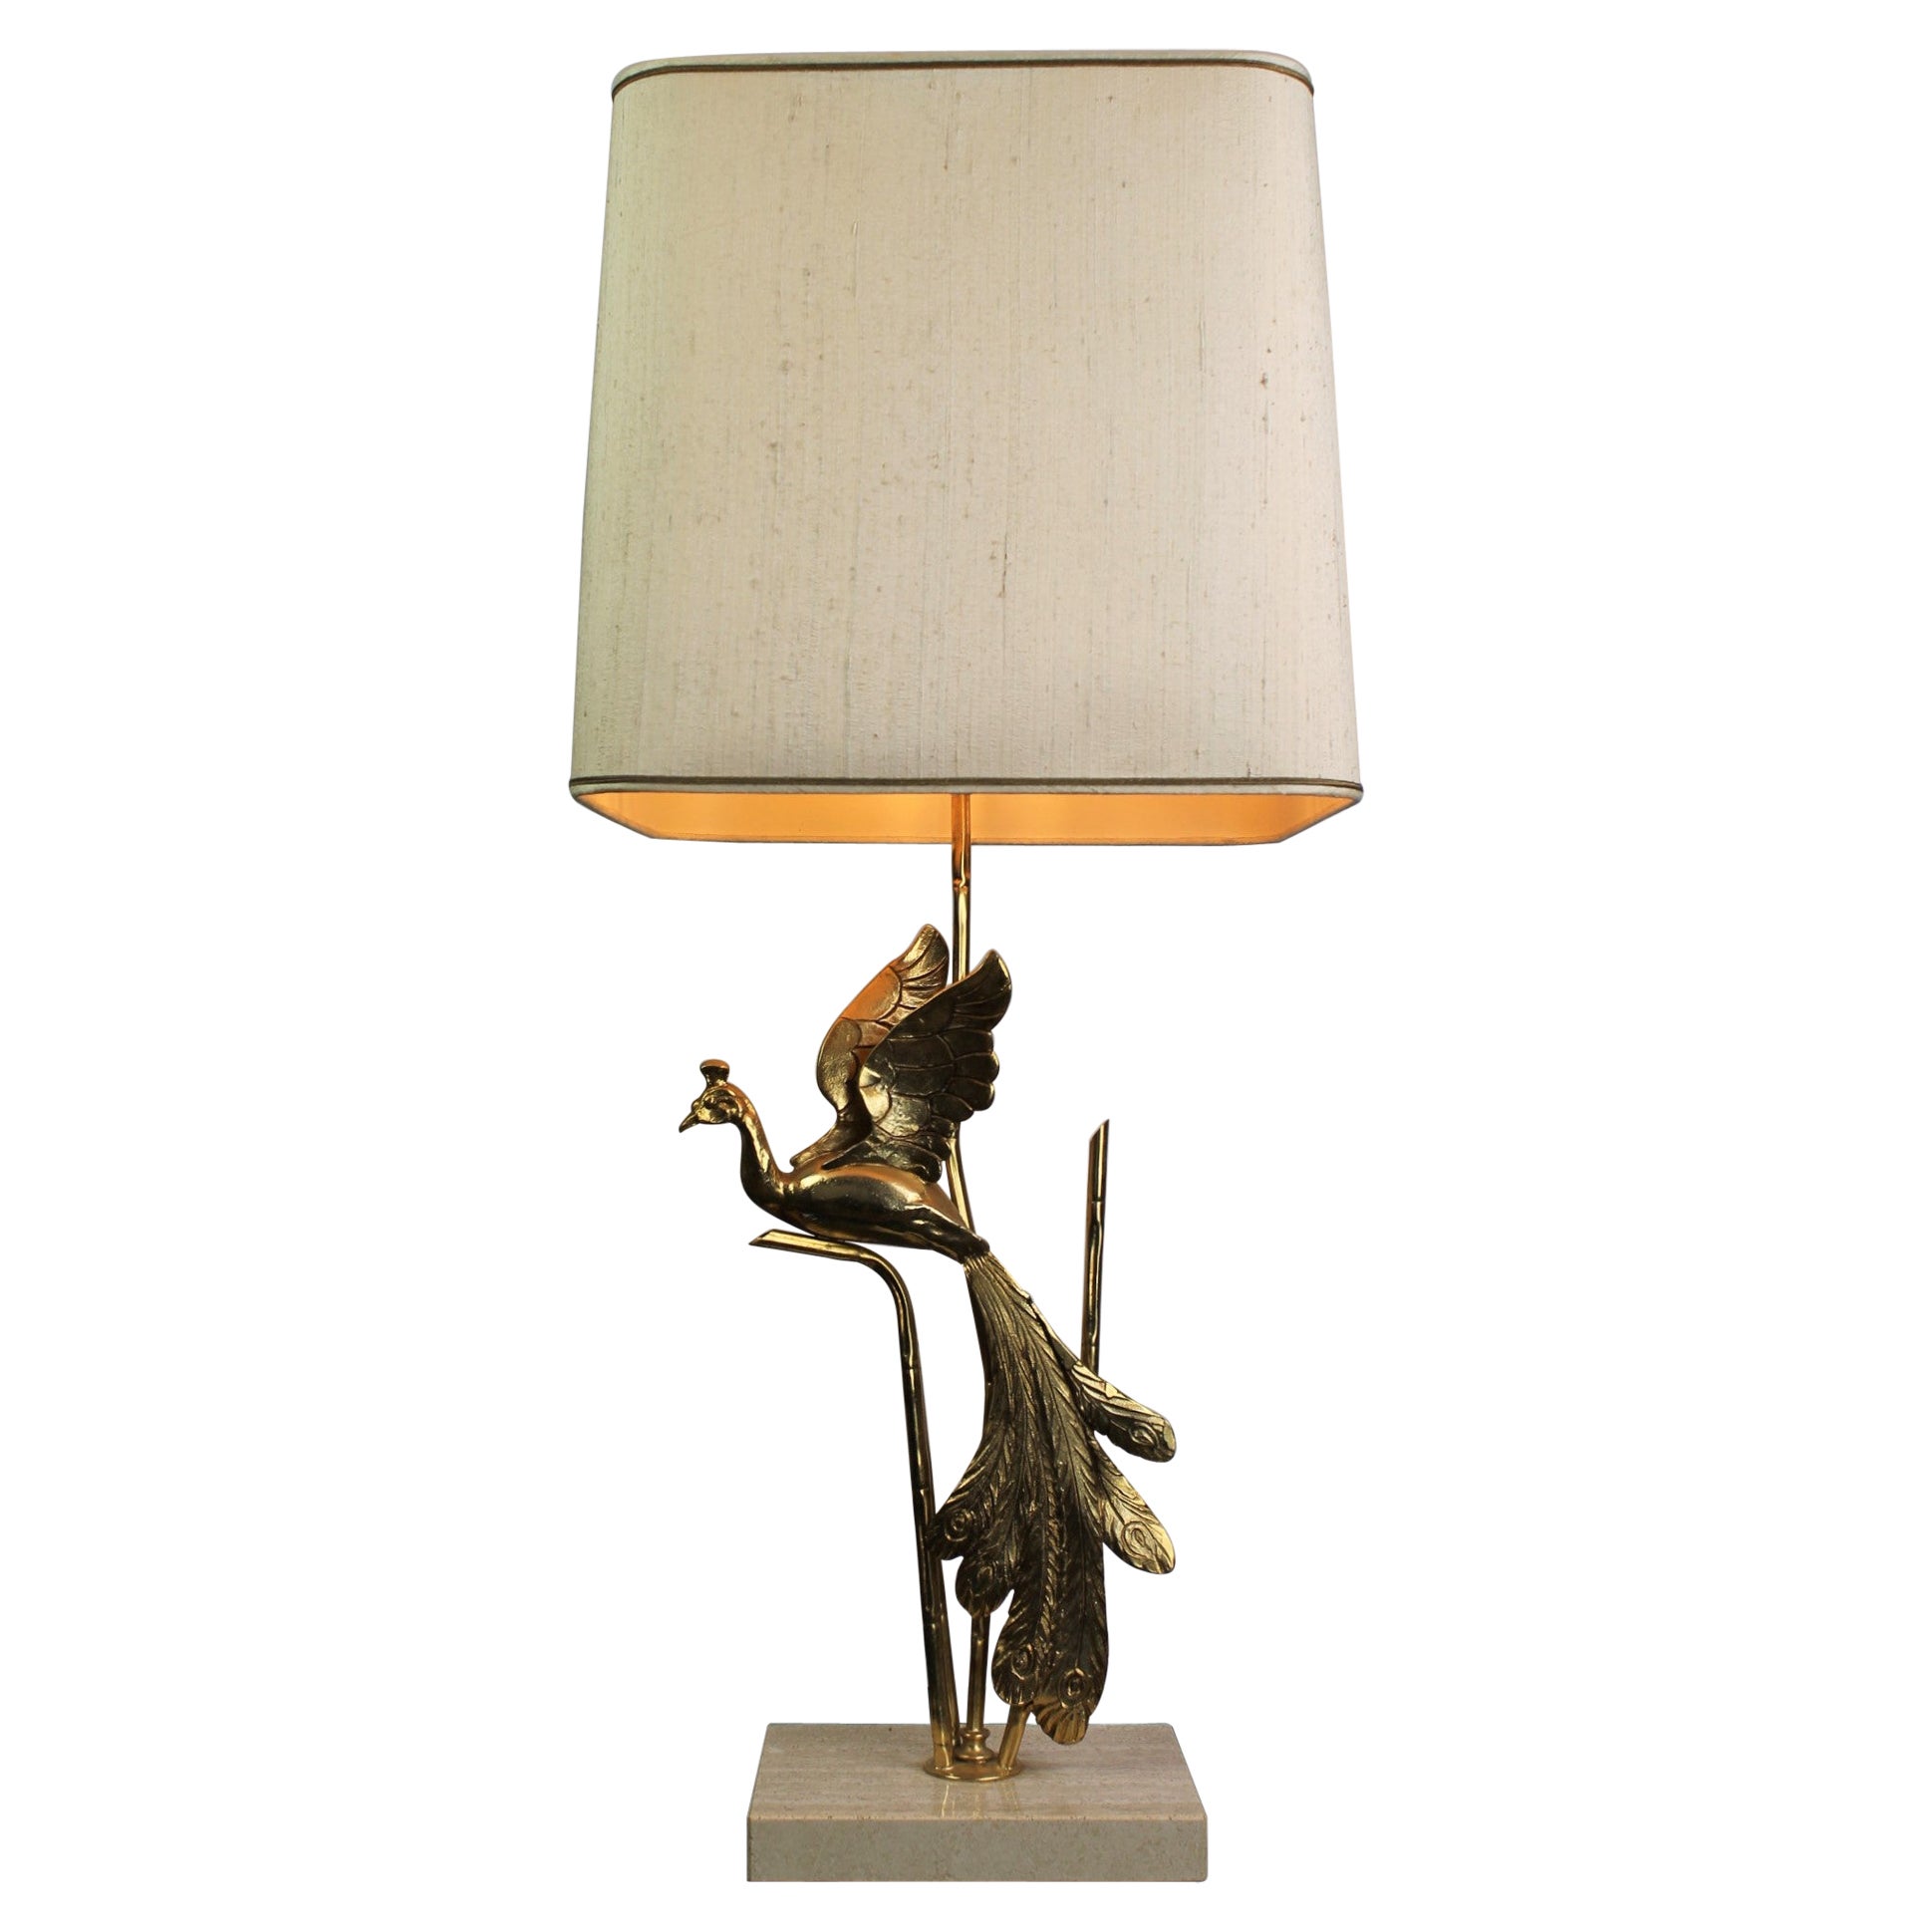 Peacock Table Lamp by Lanciotto for L'Originale, Italy, 1970s